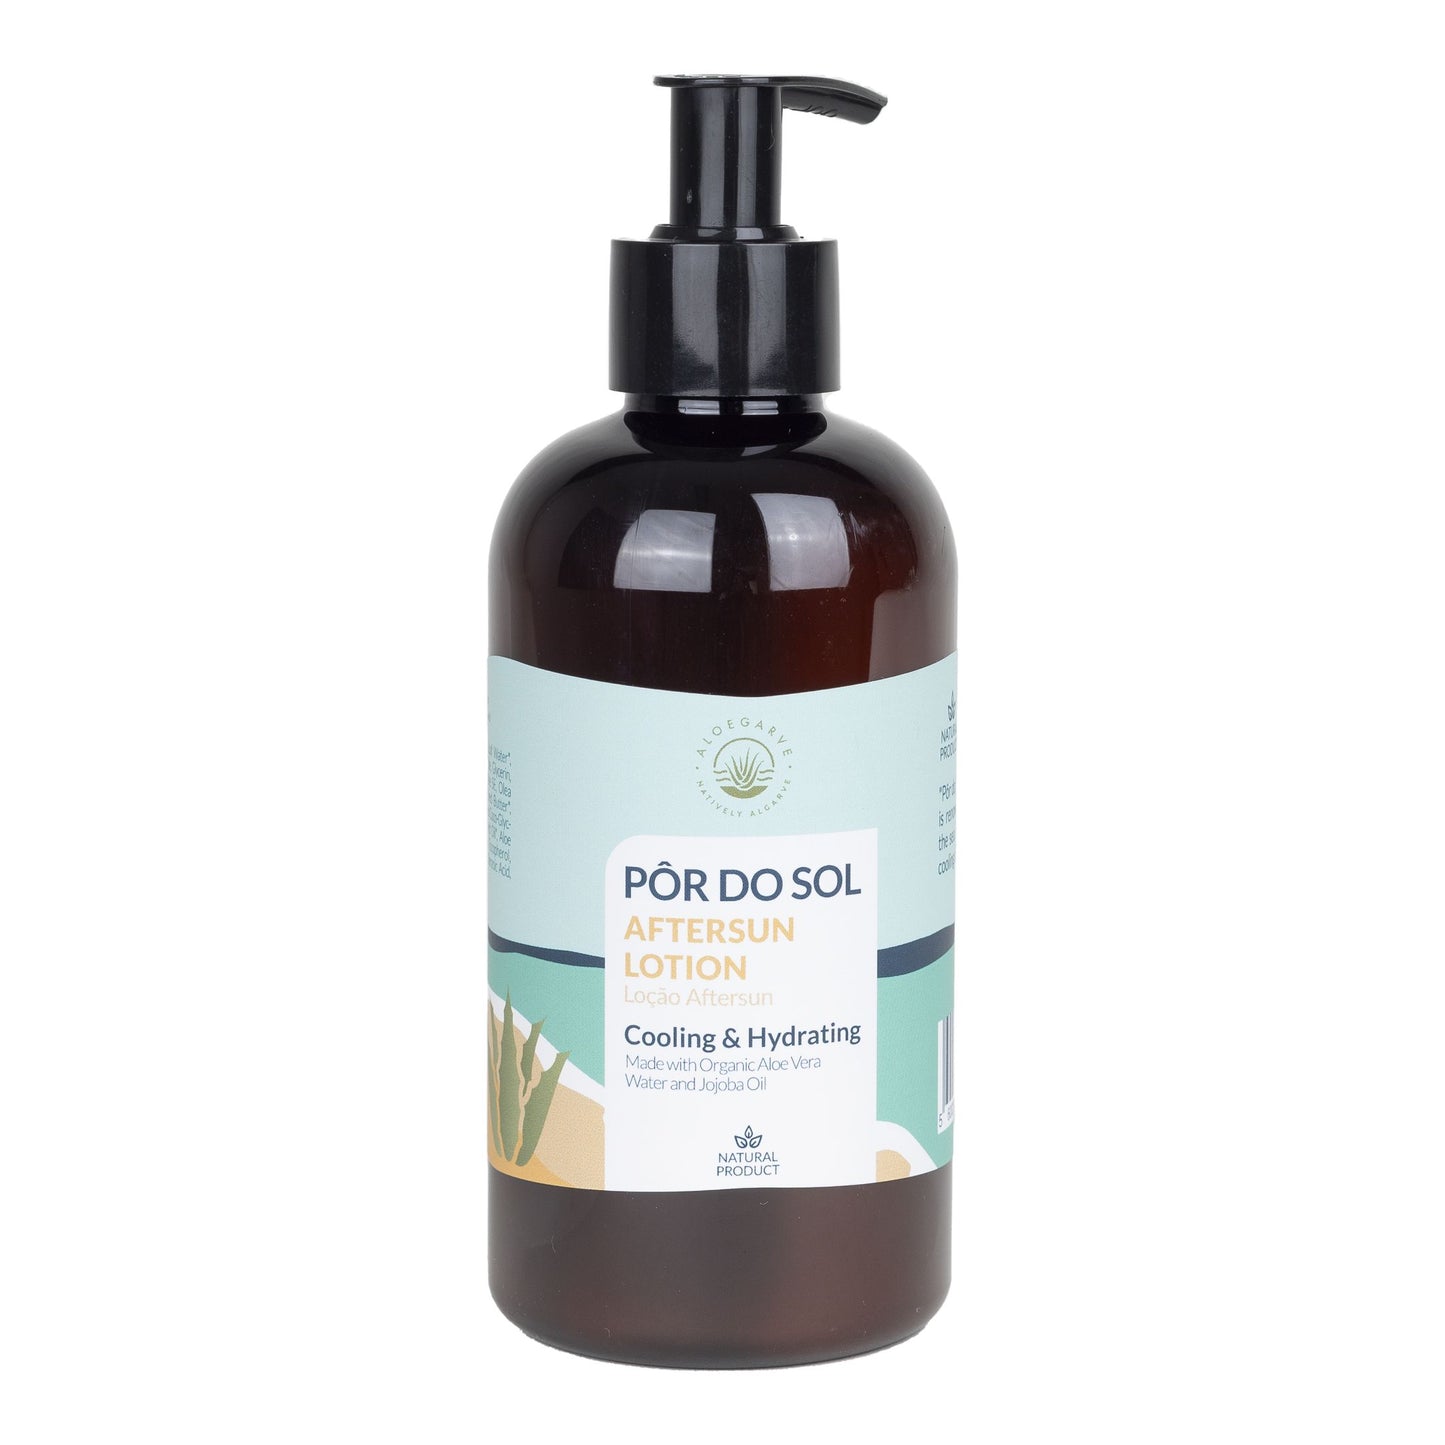 Rebuild Tissues - After Sun Lotion "Pôr do Sol" 300ml